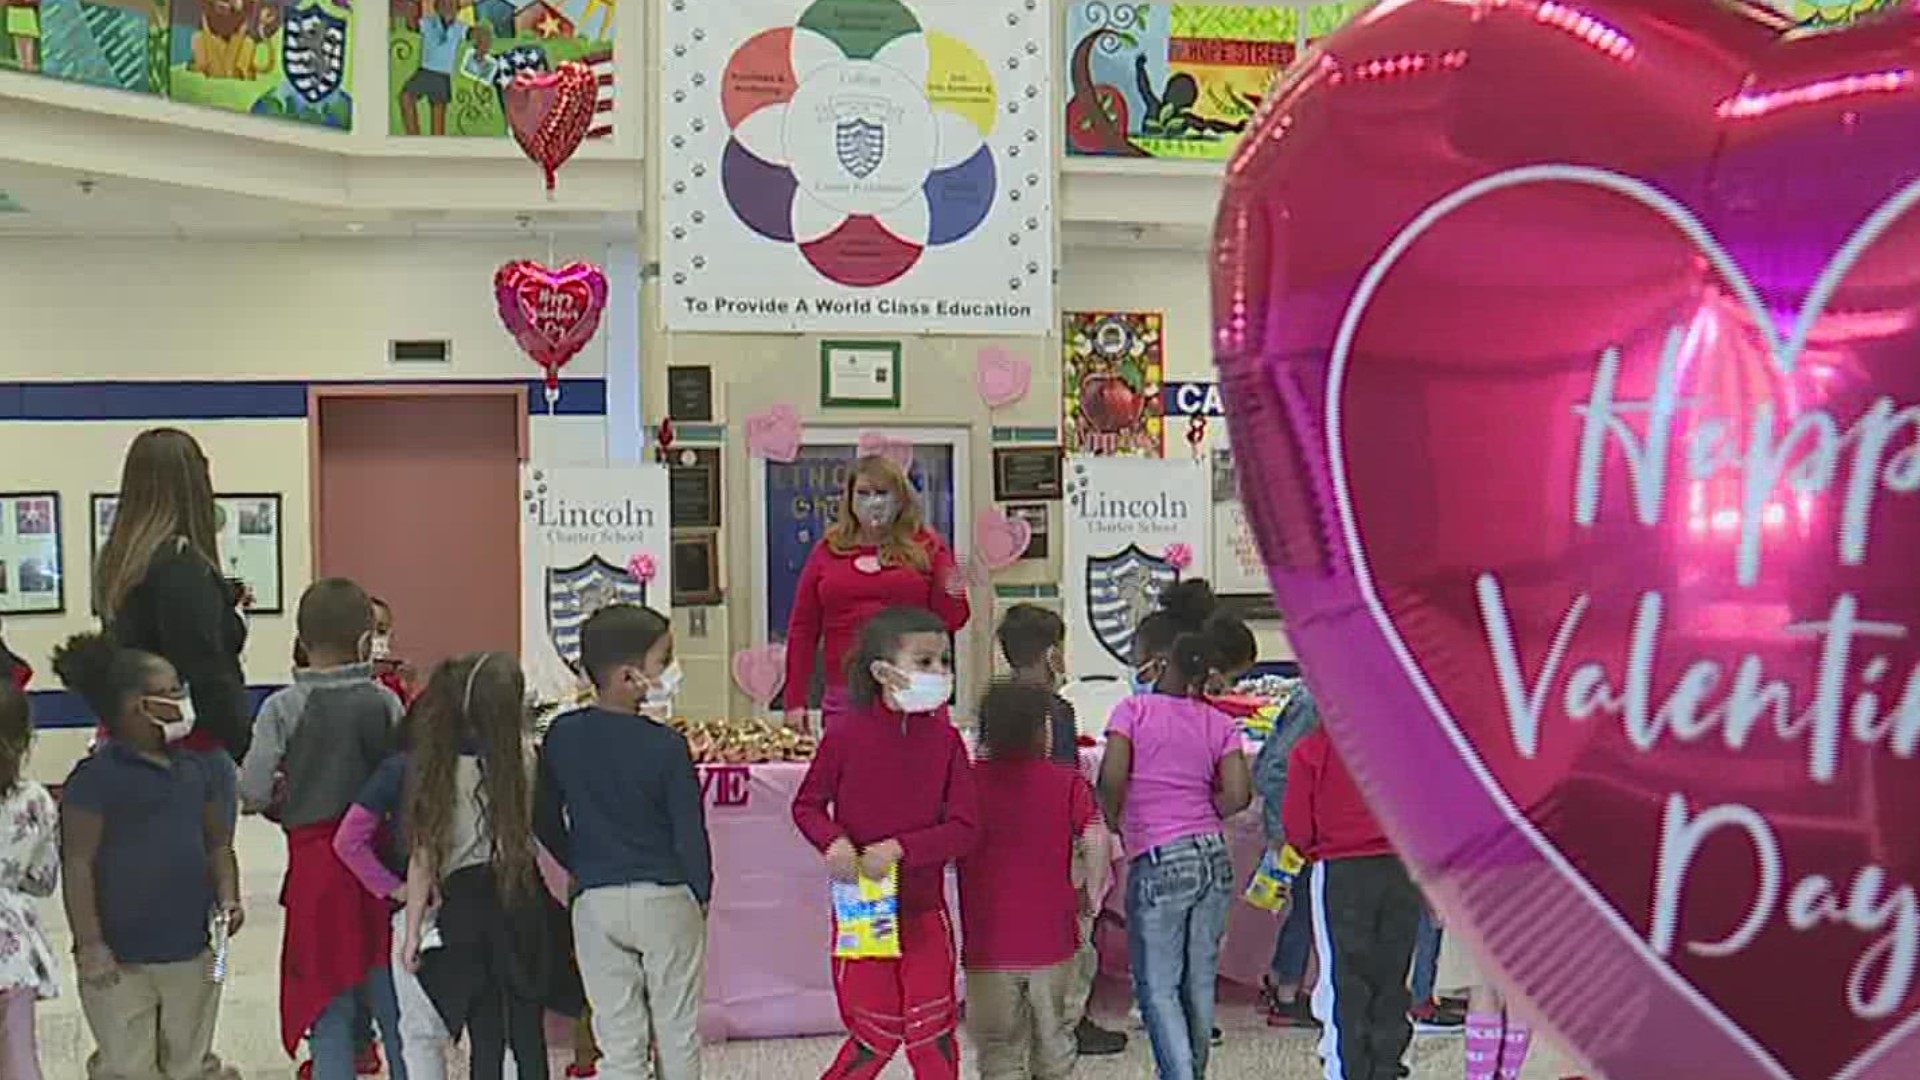 School officials invited students and community members to pick up free candy at their annual "candy store."